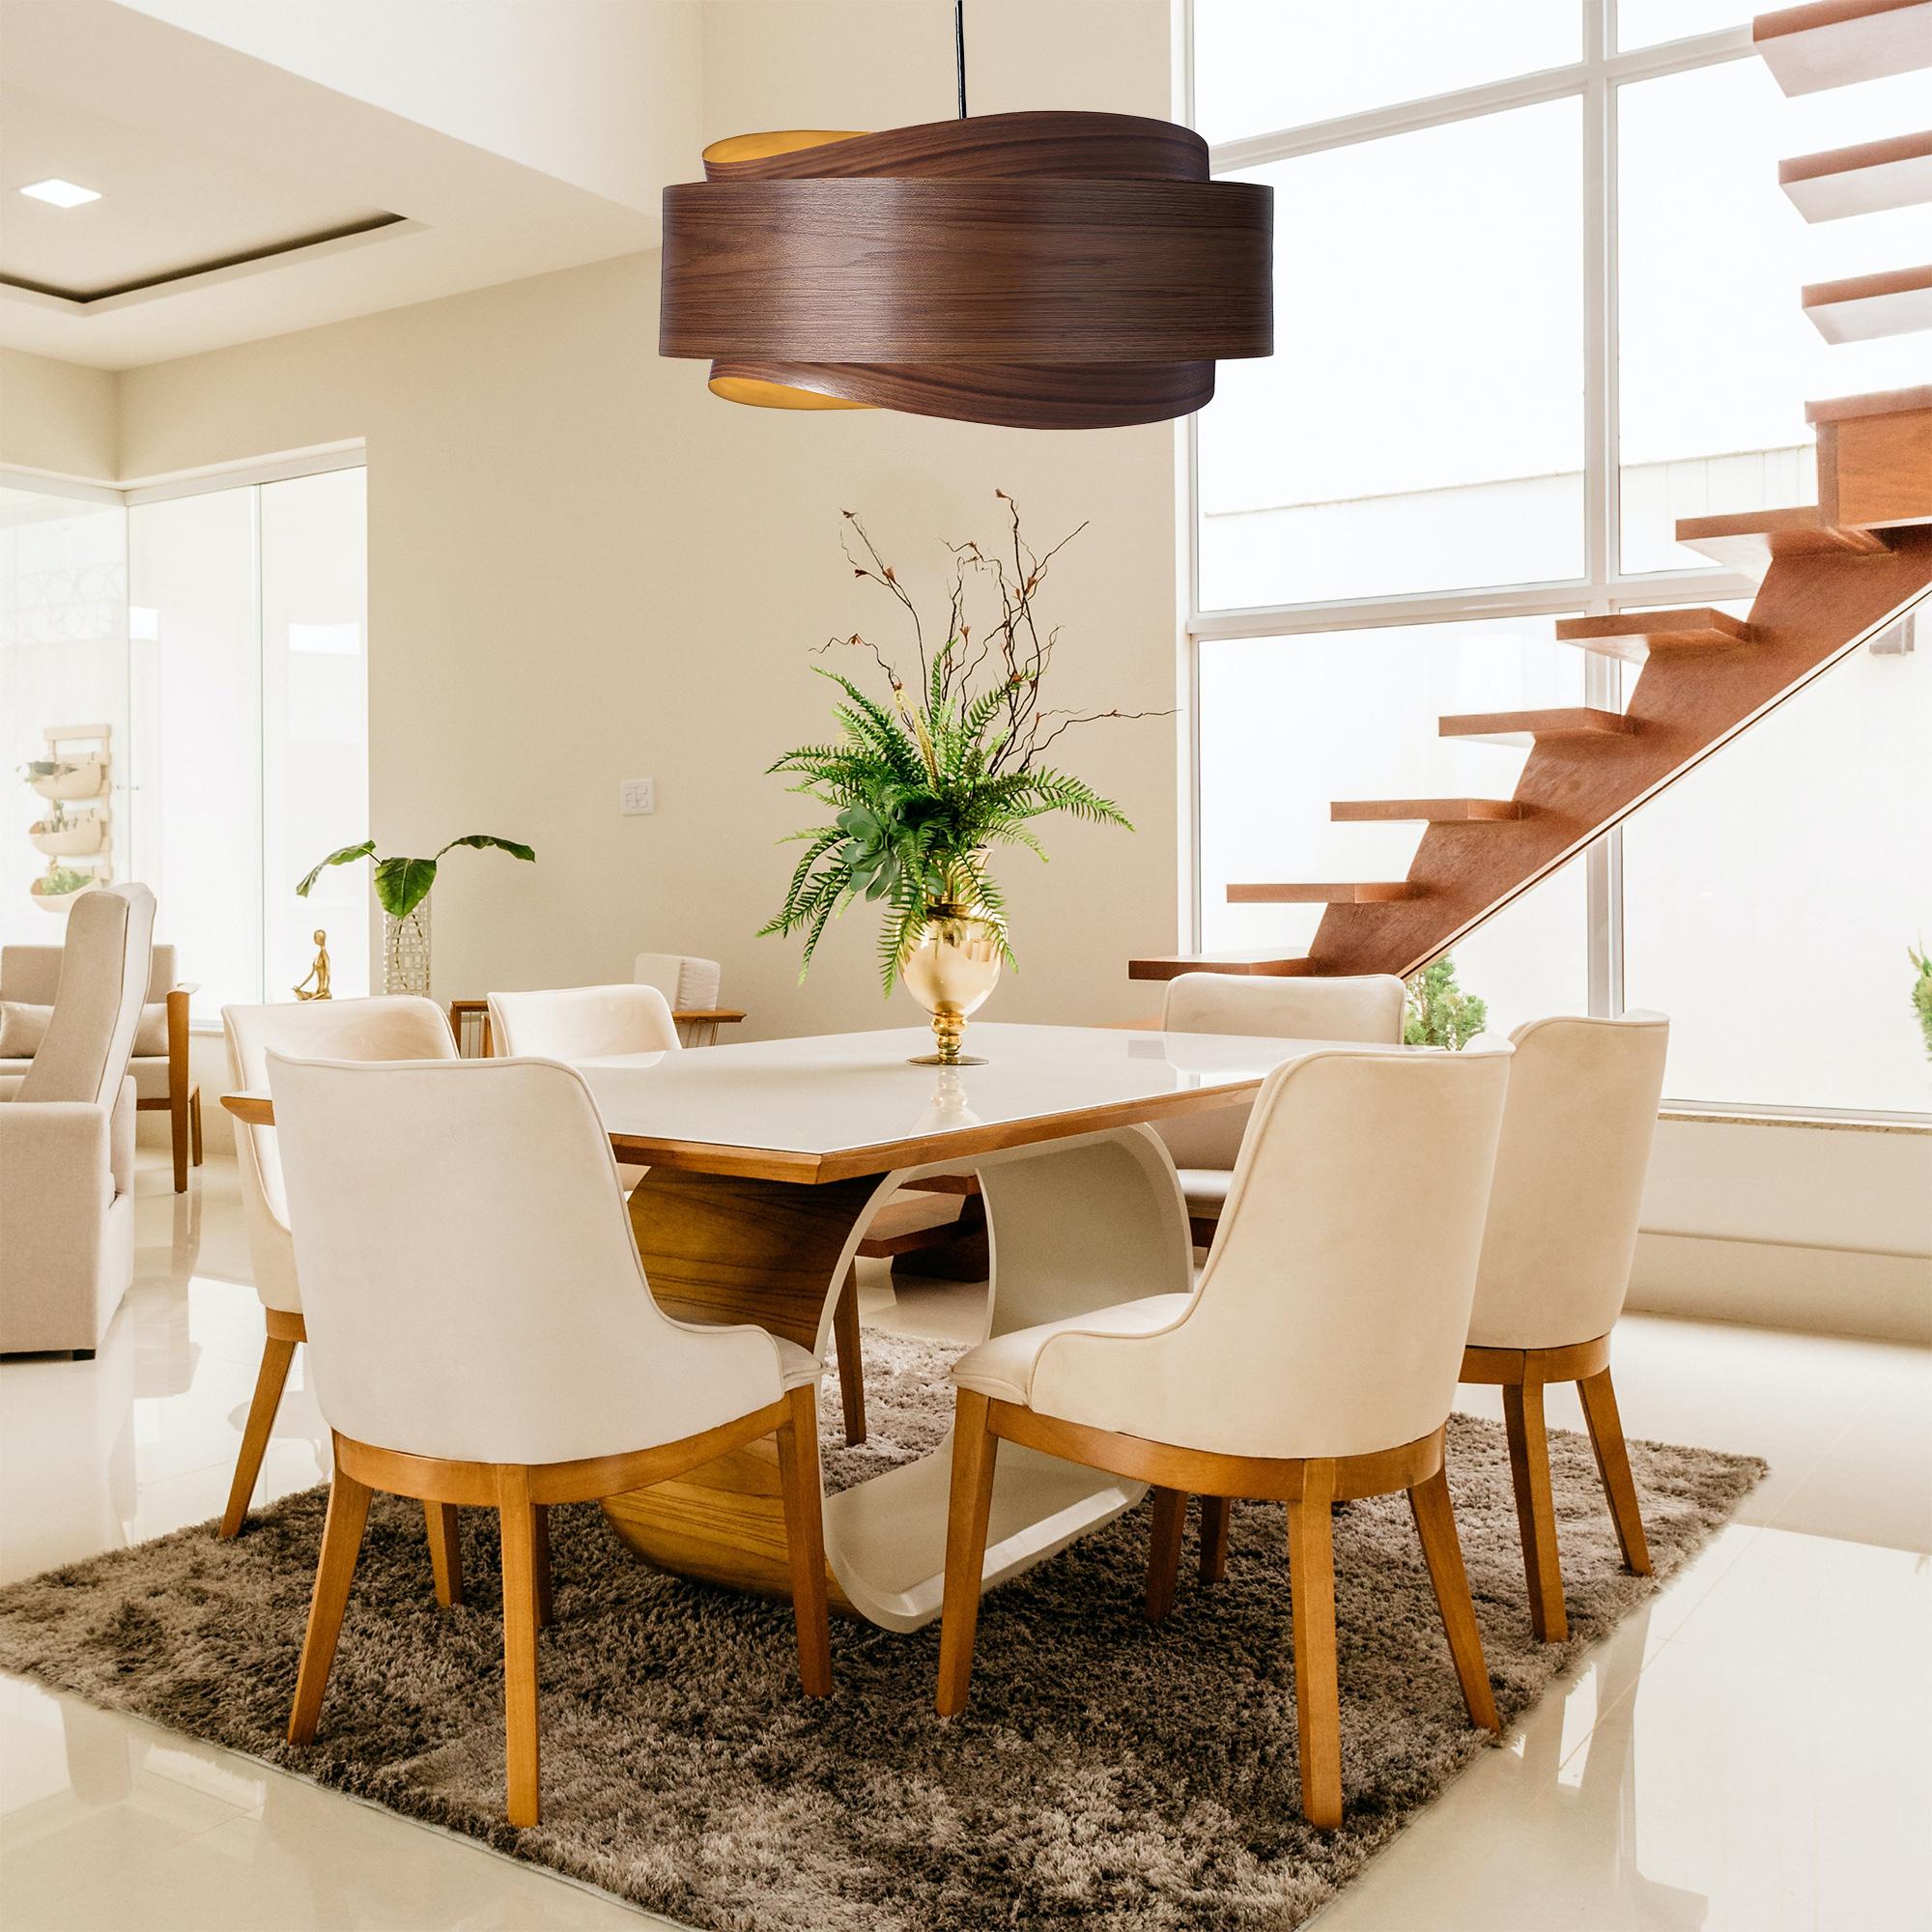 The BOWEN light fixture is a stunning example of contemporary Mid-Century Modern design. With its minimalist silhouette, warm walnut tones, and unique shape, this pendant light is sure to add a touch of sophistication to any space.

The BOWEN light